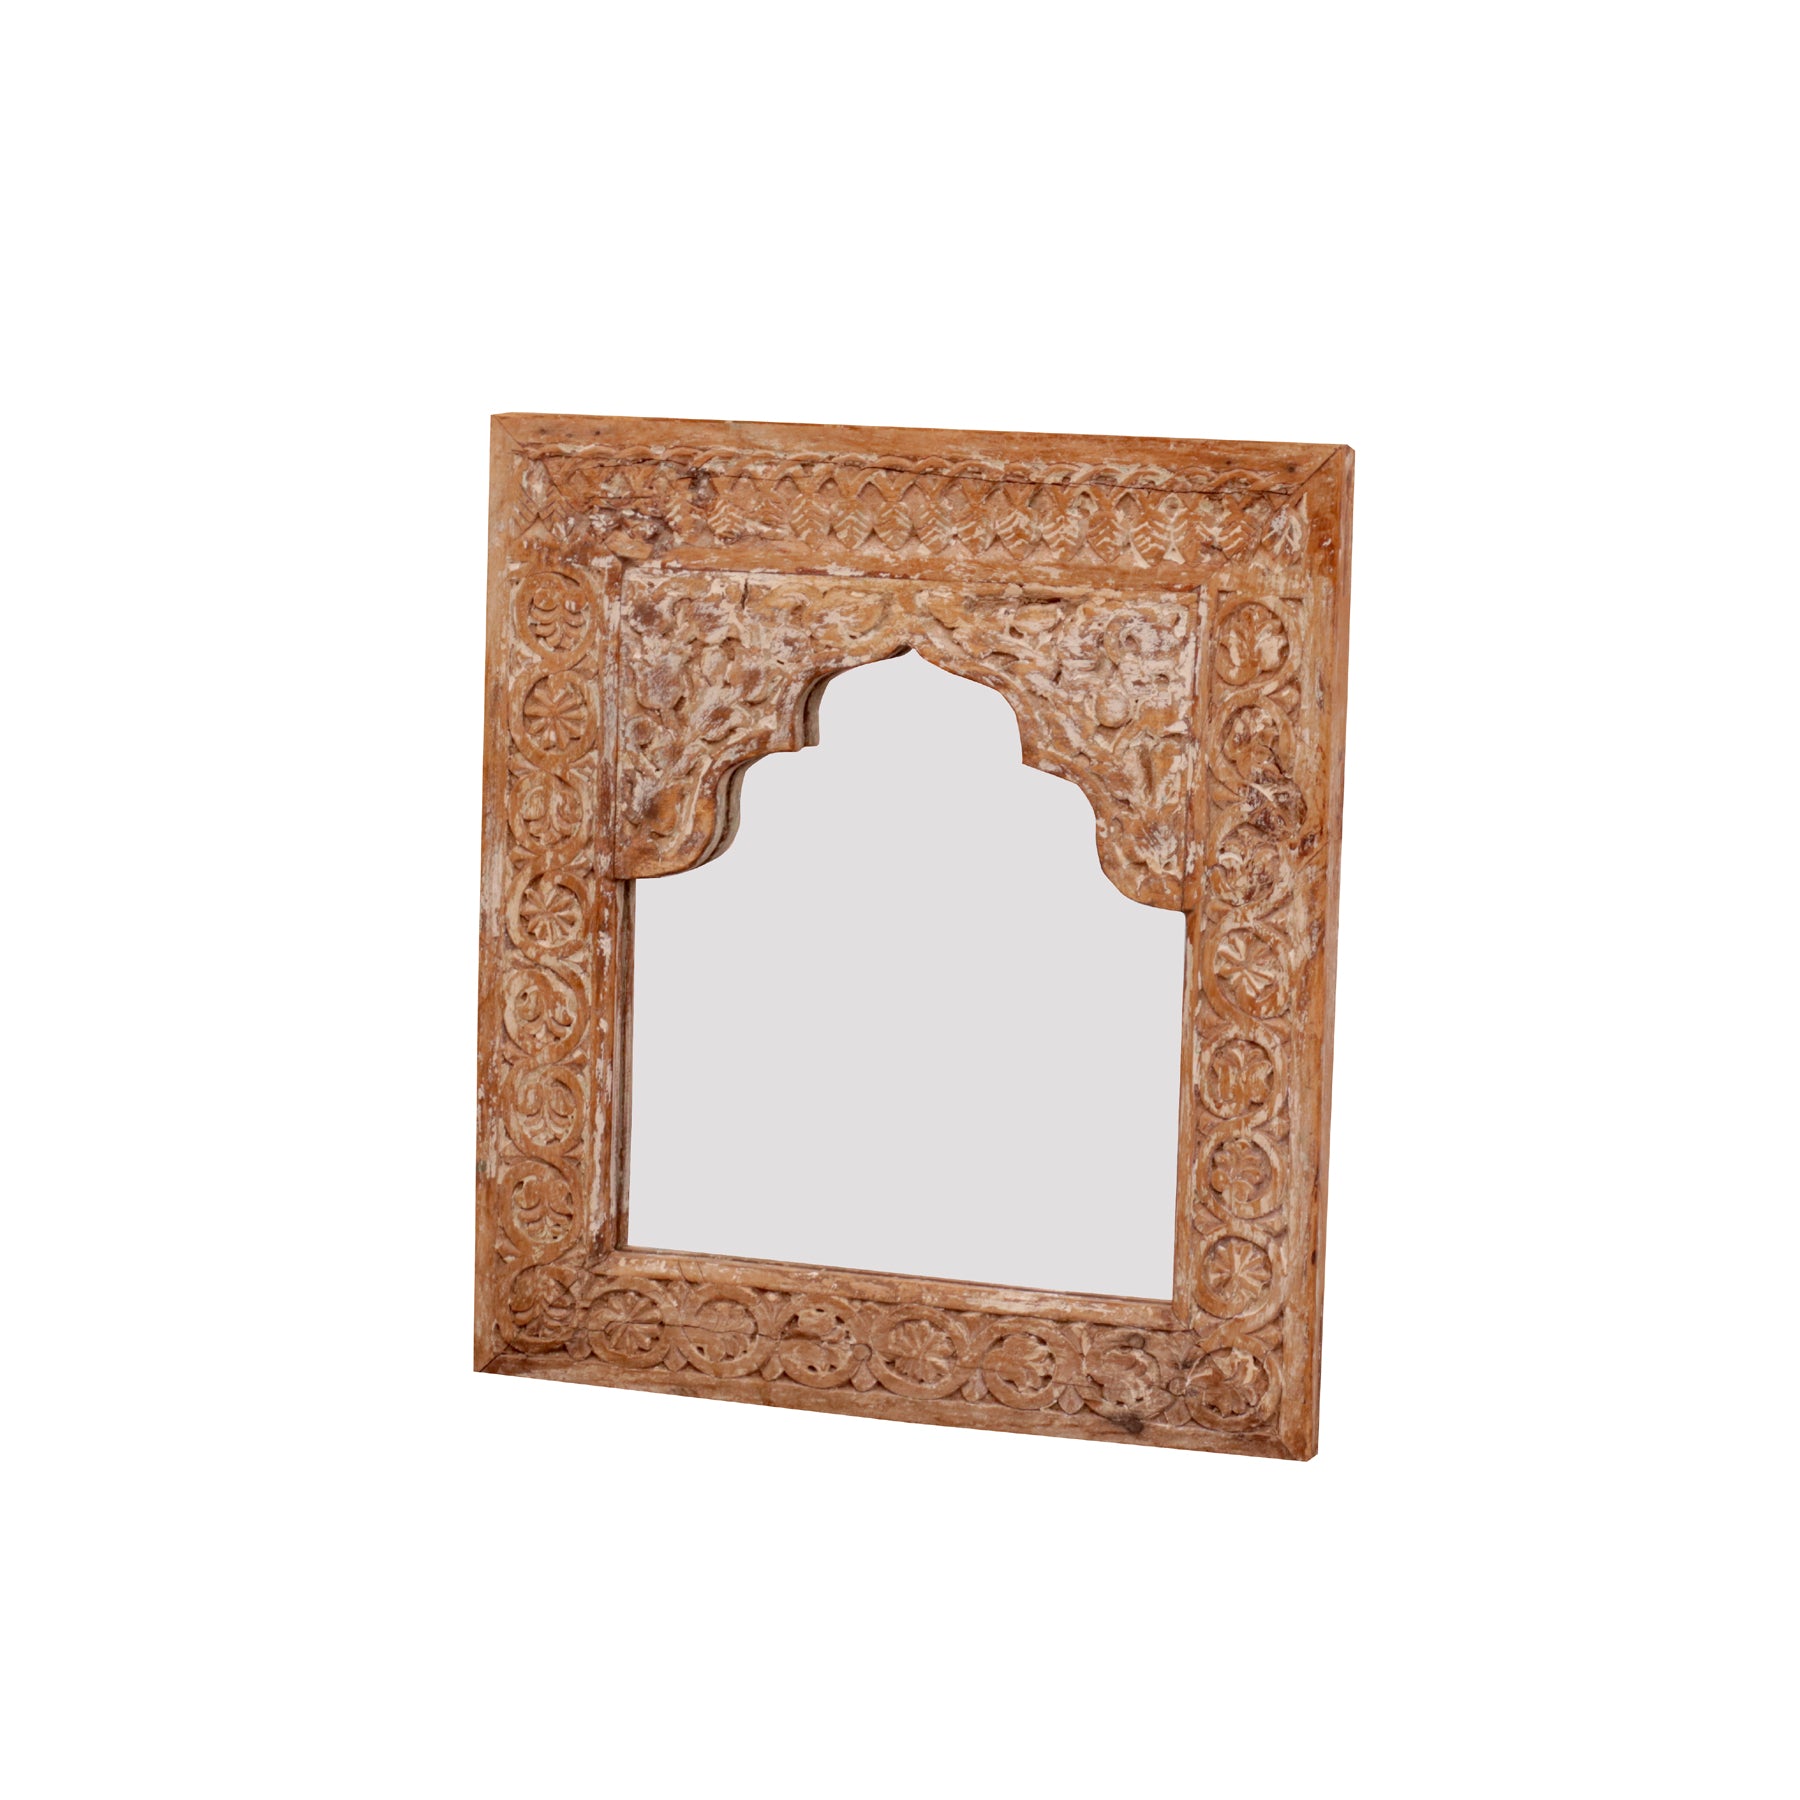 Traditional Mirror Frame Mirror